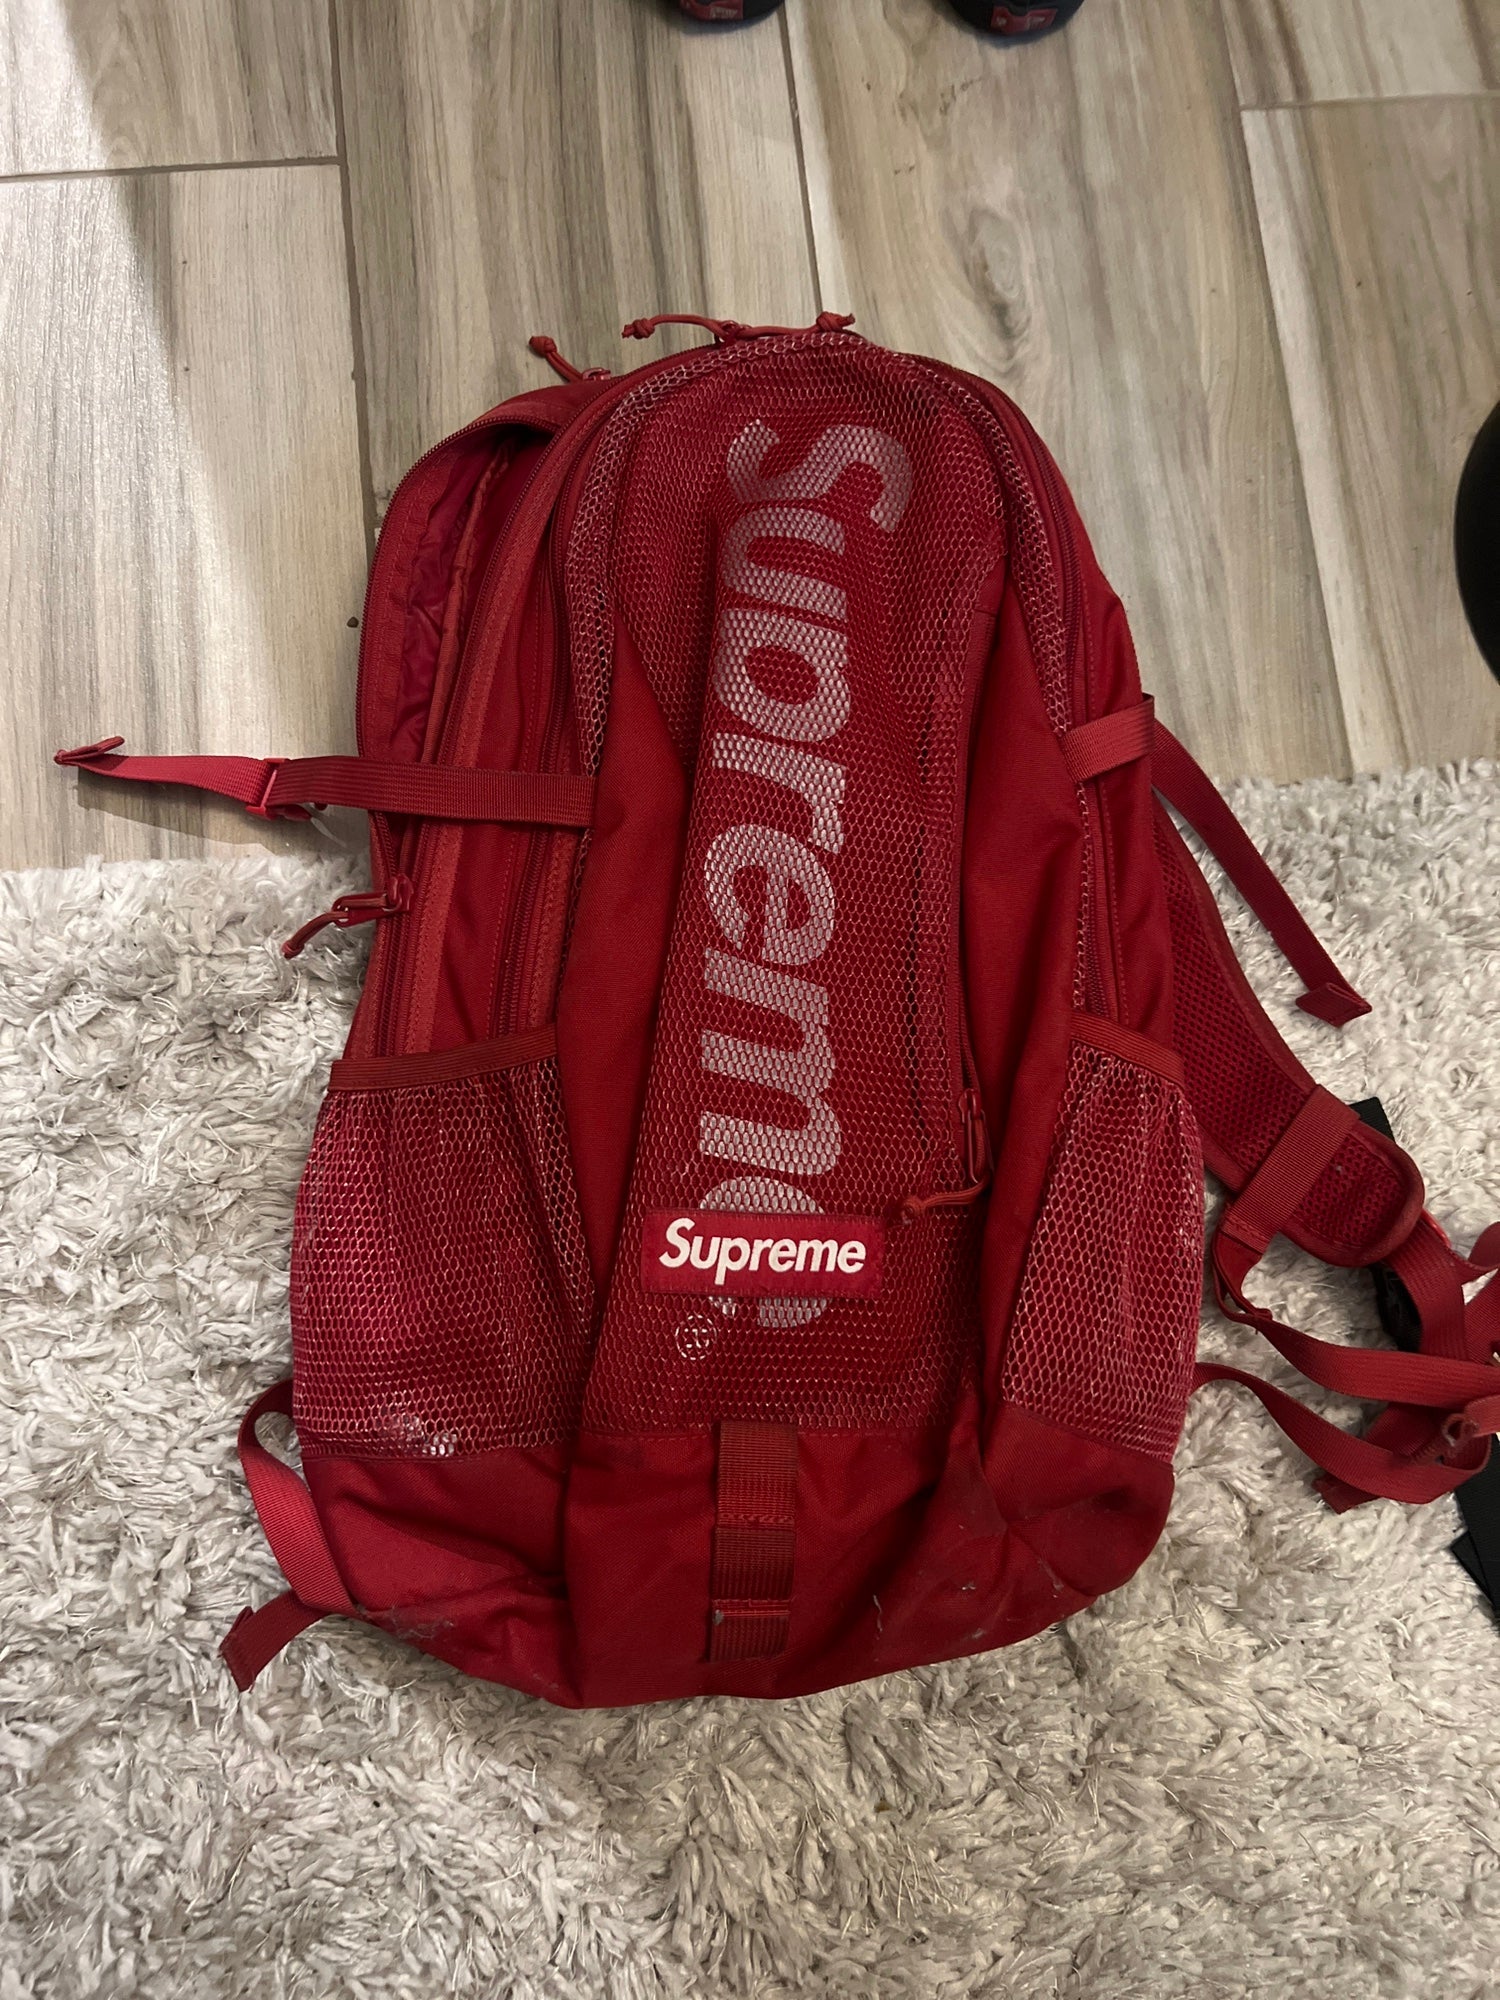 Genuine Supreme Bag / Backpack Red Colour, Perfect for Travel With Laptop  26 L